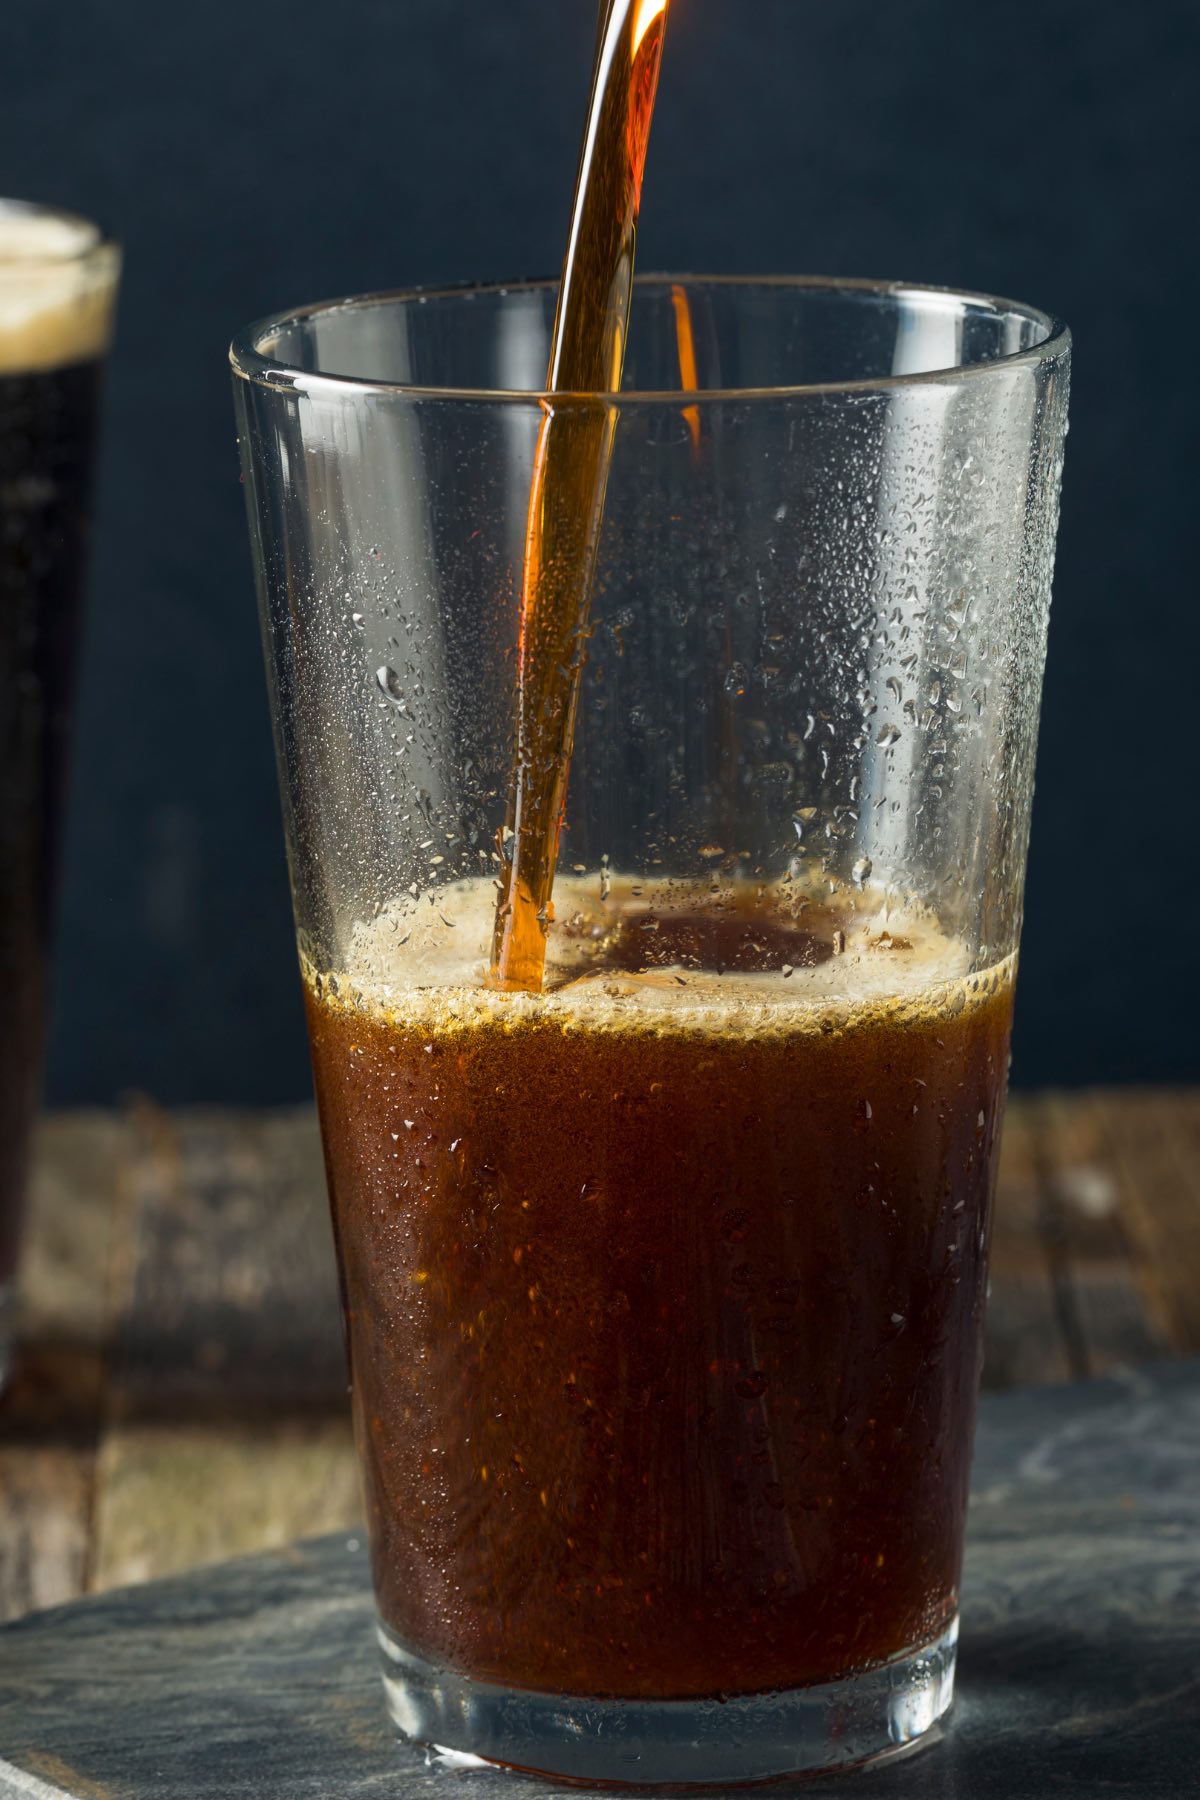 It’s the coolest cold brew you can find! In recent years, Nitro Cold Brew has become an incredibly popular item at coffee shops and grocery stores. This unique kind of coffee is infused with nitrogen, which helps to improve its taste and texture. Nitro coffee is a menu item at Starbucks, but it can be easily recreated at home.